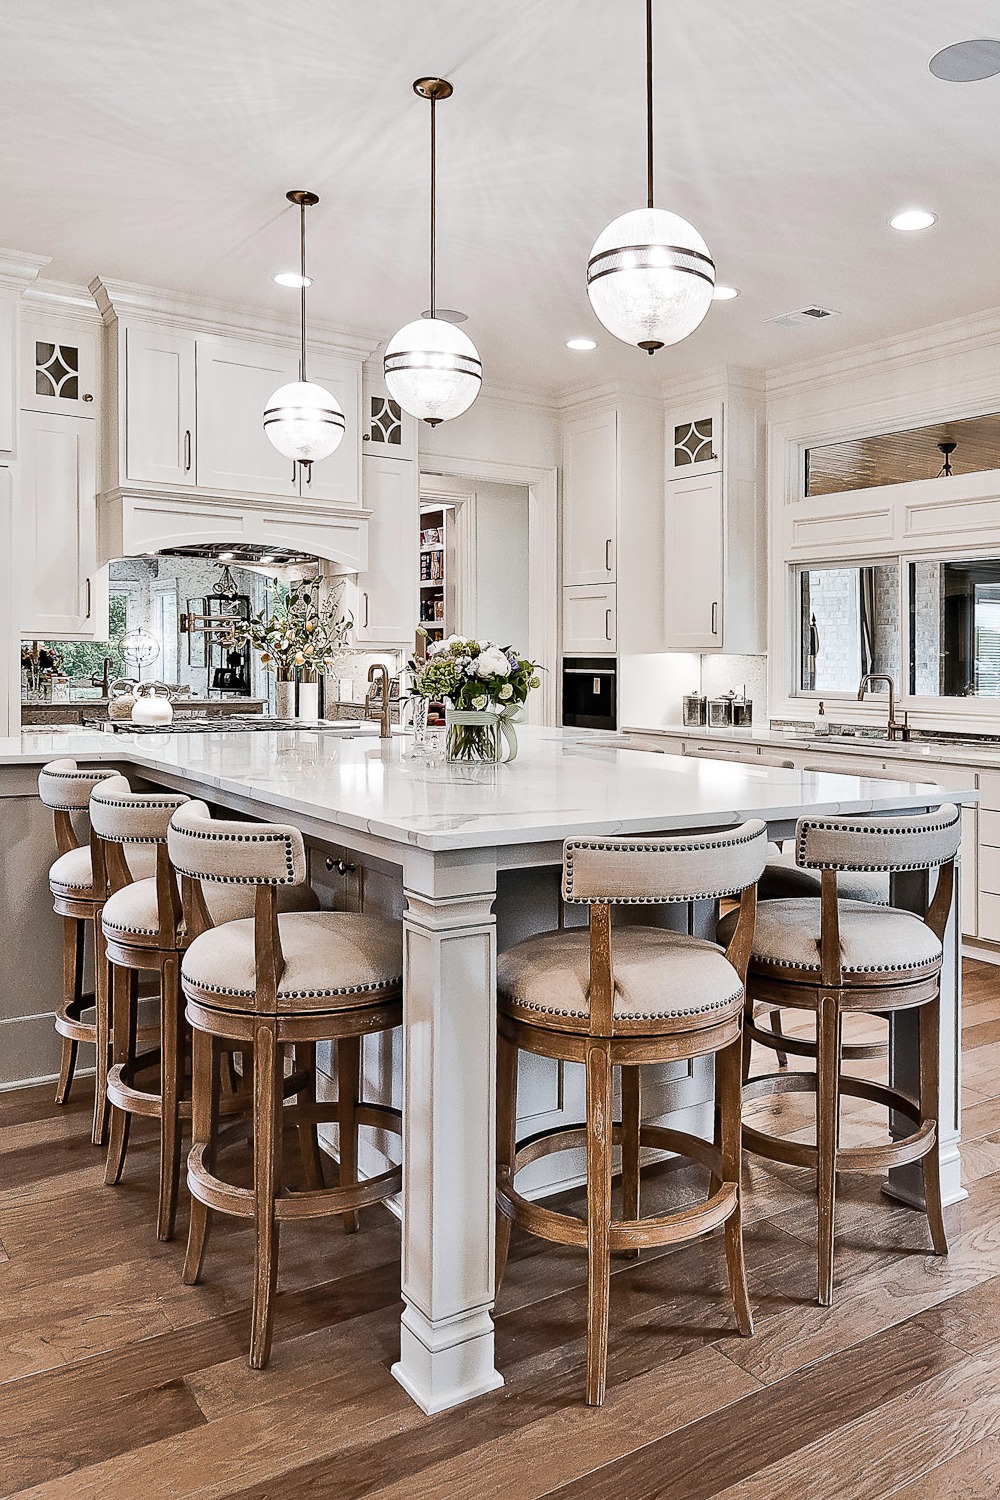 Natural Light White Cabinets Modern Mirror Dining Room Intricate Patterns Focal Point Rustic Appeal Space Walls